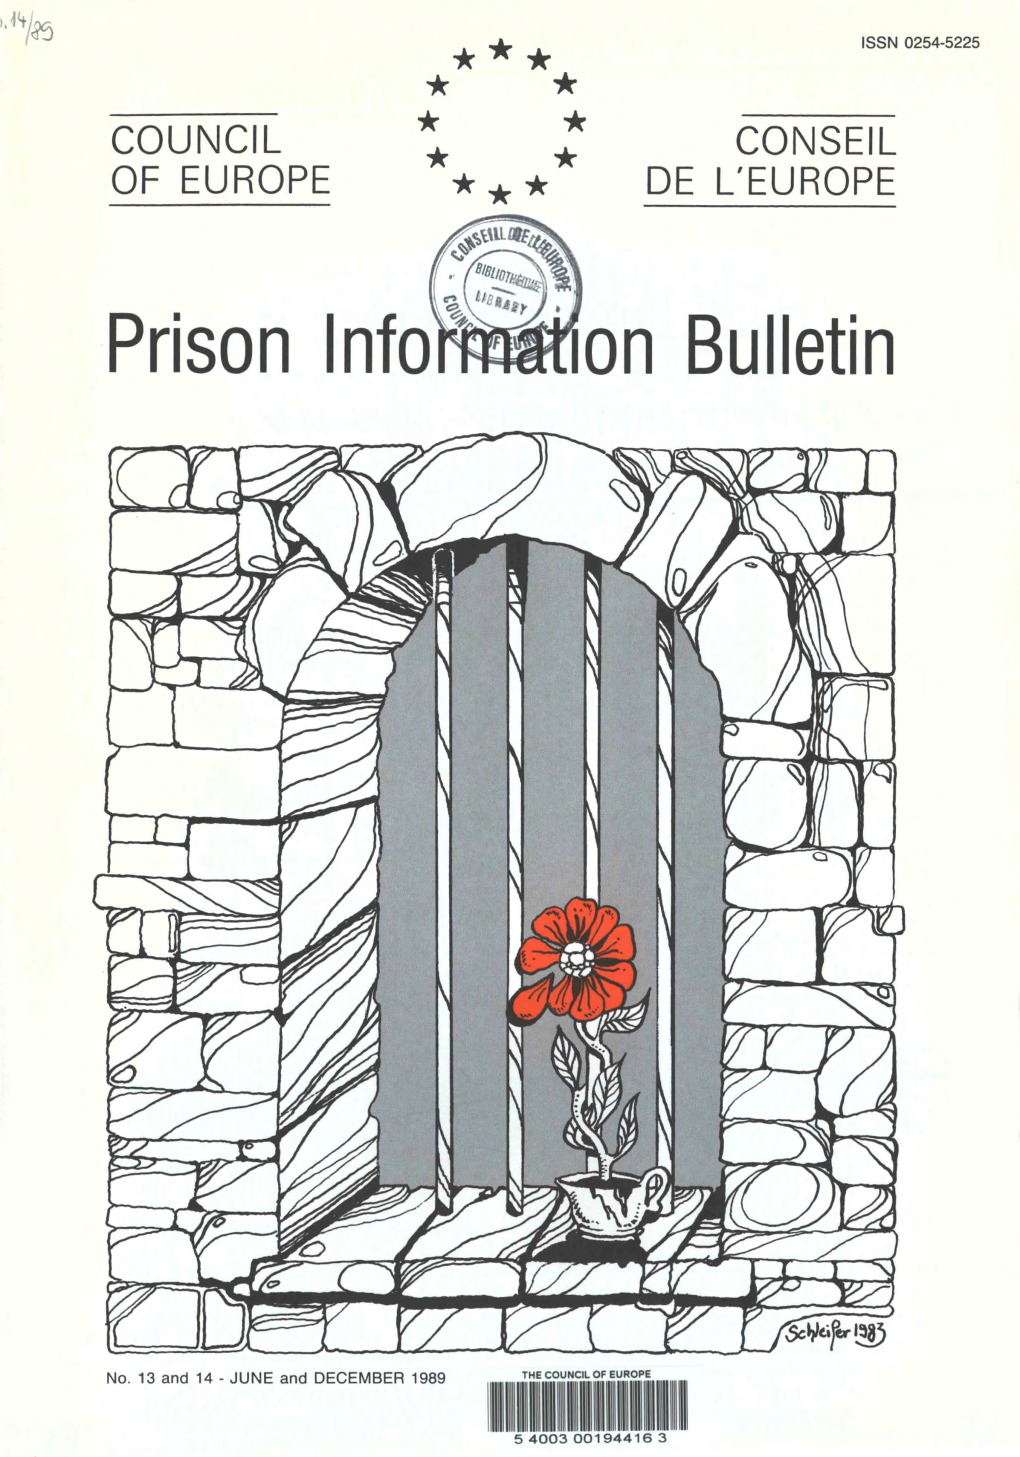 PRISON INFORMATION BULLETIN Page 13 and 14/89 Foreword